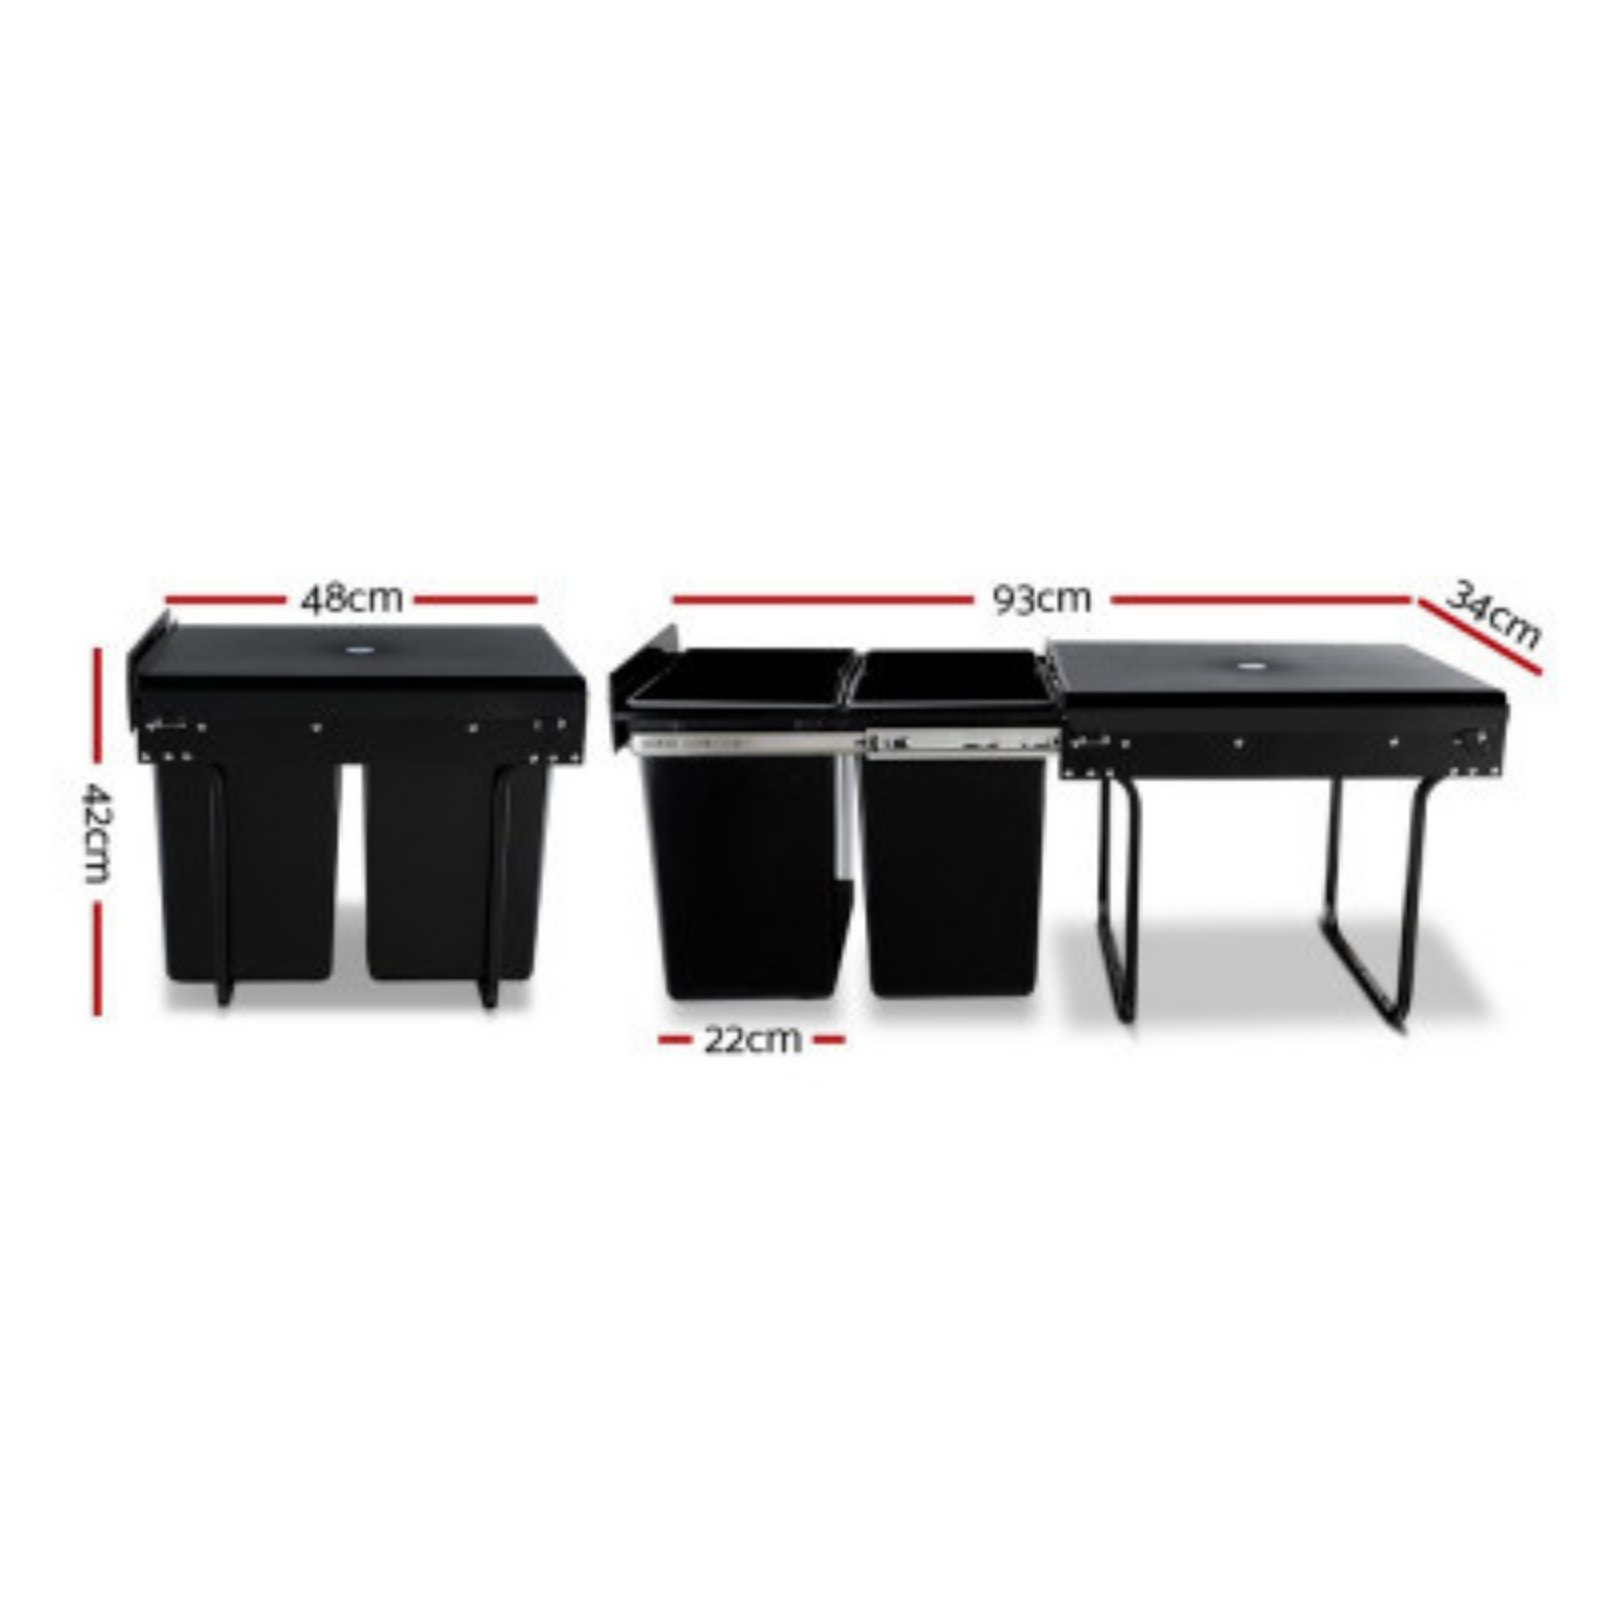 Cefito Dual Side Pull Out Bin has 15/20 litre capacity for each compartment with lids